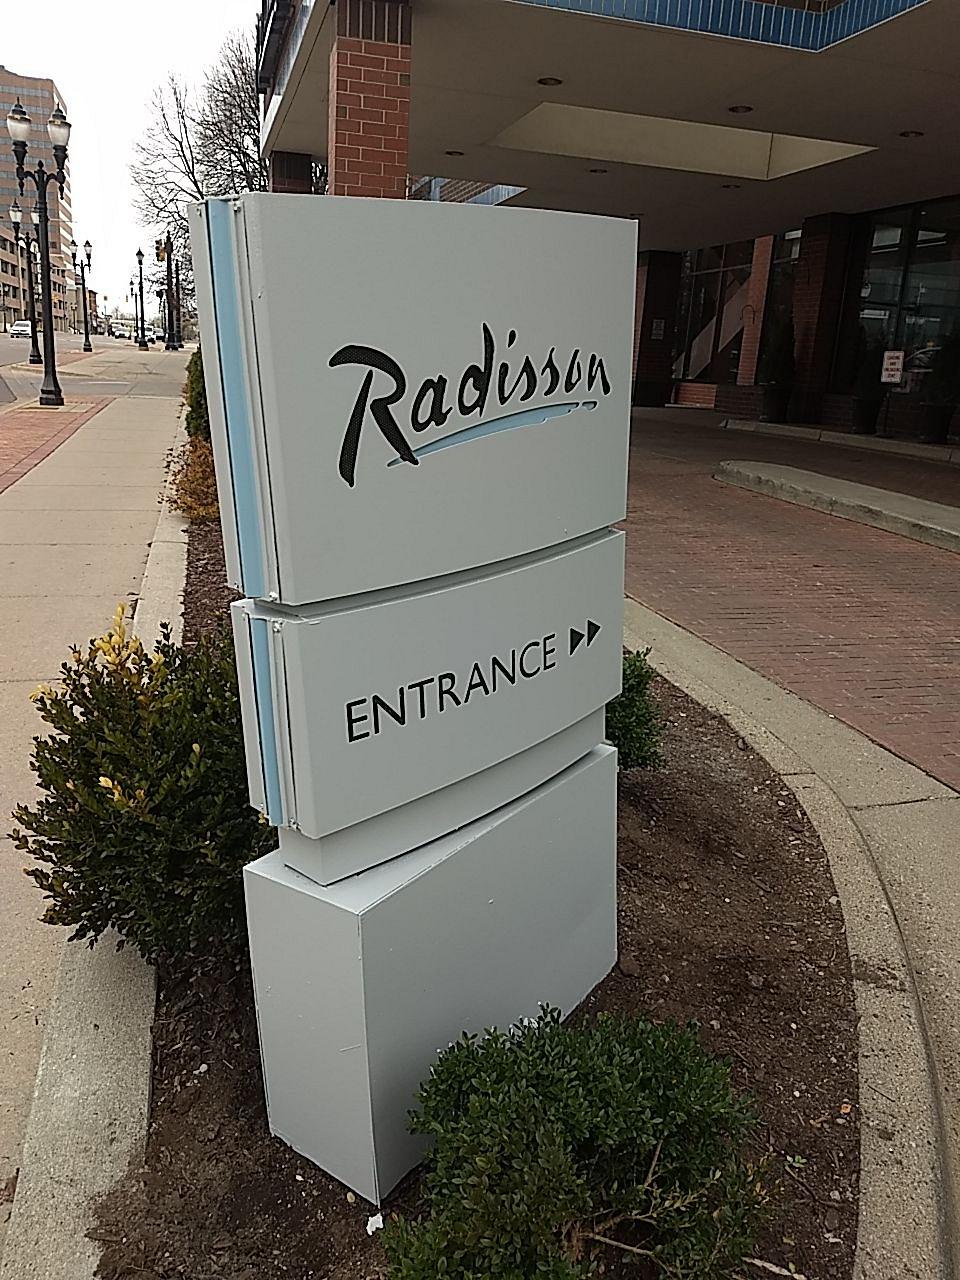 Radisson Directional "Entrance" Sign with arrow